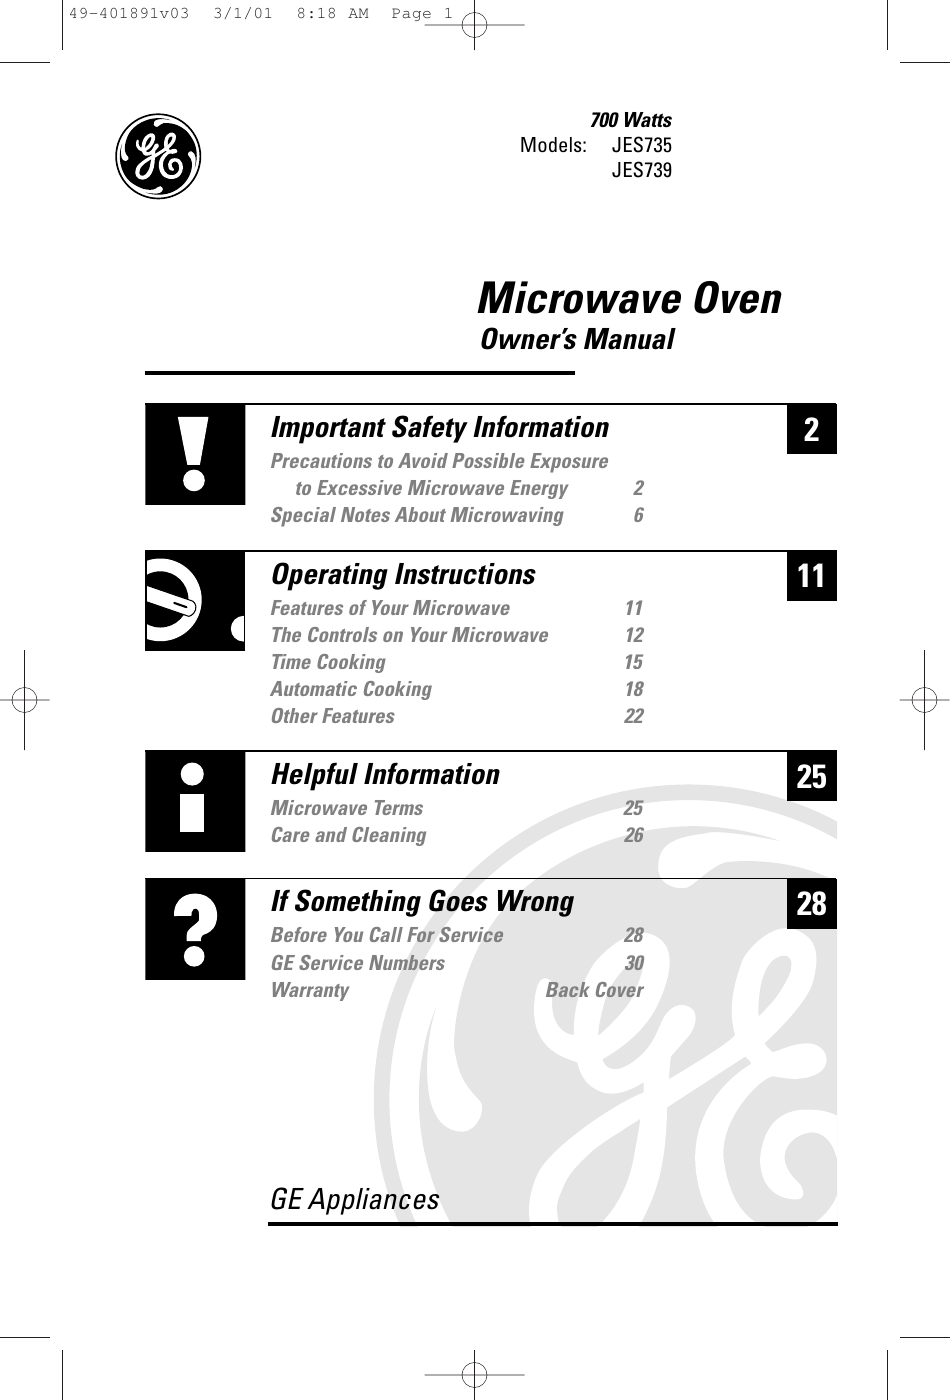 Microwave OvenOwner’s Manual700 WattsModels: JES735JES739225Helpful InformationMicrowave Terms 25Care and Cleaning 2628If Something Goes WrongBefore You Call For Service 28GE Service Numbers 30Warranty Back CoverGE Appliances11Important Safety InformationPrecautions to Avoid Possible Exposure to Excessive Microwave Energy 2Special Notes About Microwaving 6Operating InstructionsFeatures of Your Microwave 11The Controls on Your Microwave 12Time Cooking 15Automatic Cooking 18Other Features 2249-401891v03  3/1/01  8:18 AM  Page 1